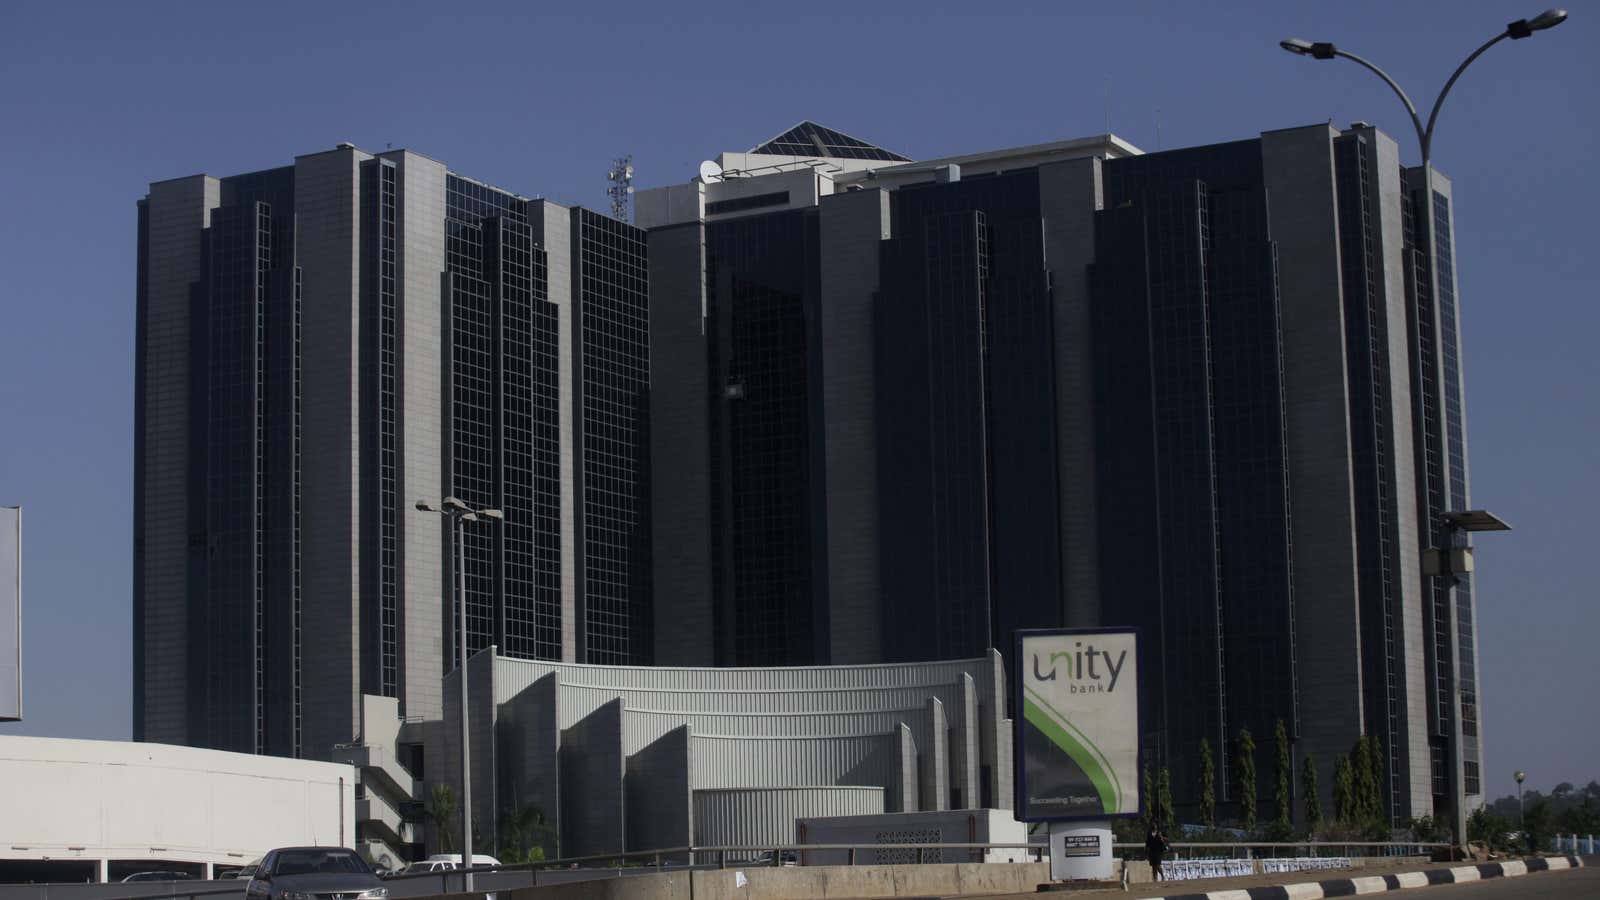 Central Bank of Nigeria headquarters in Abuja